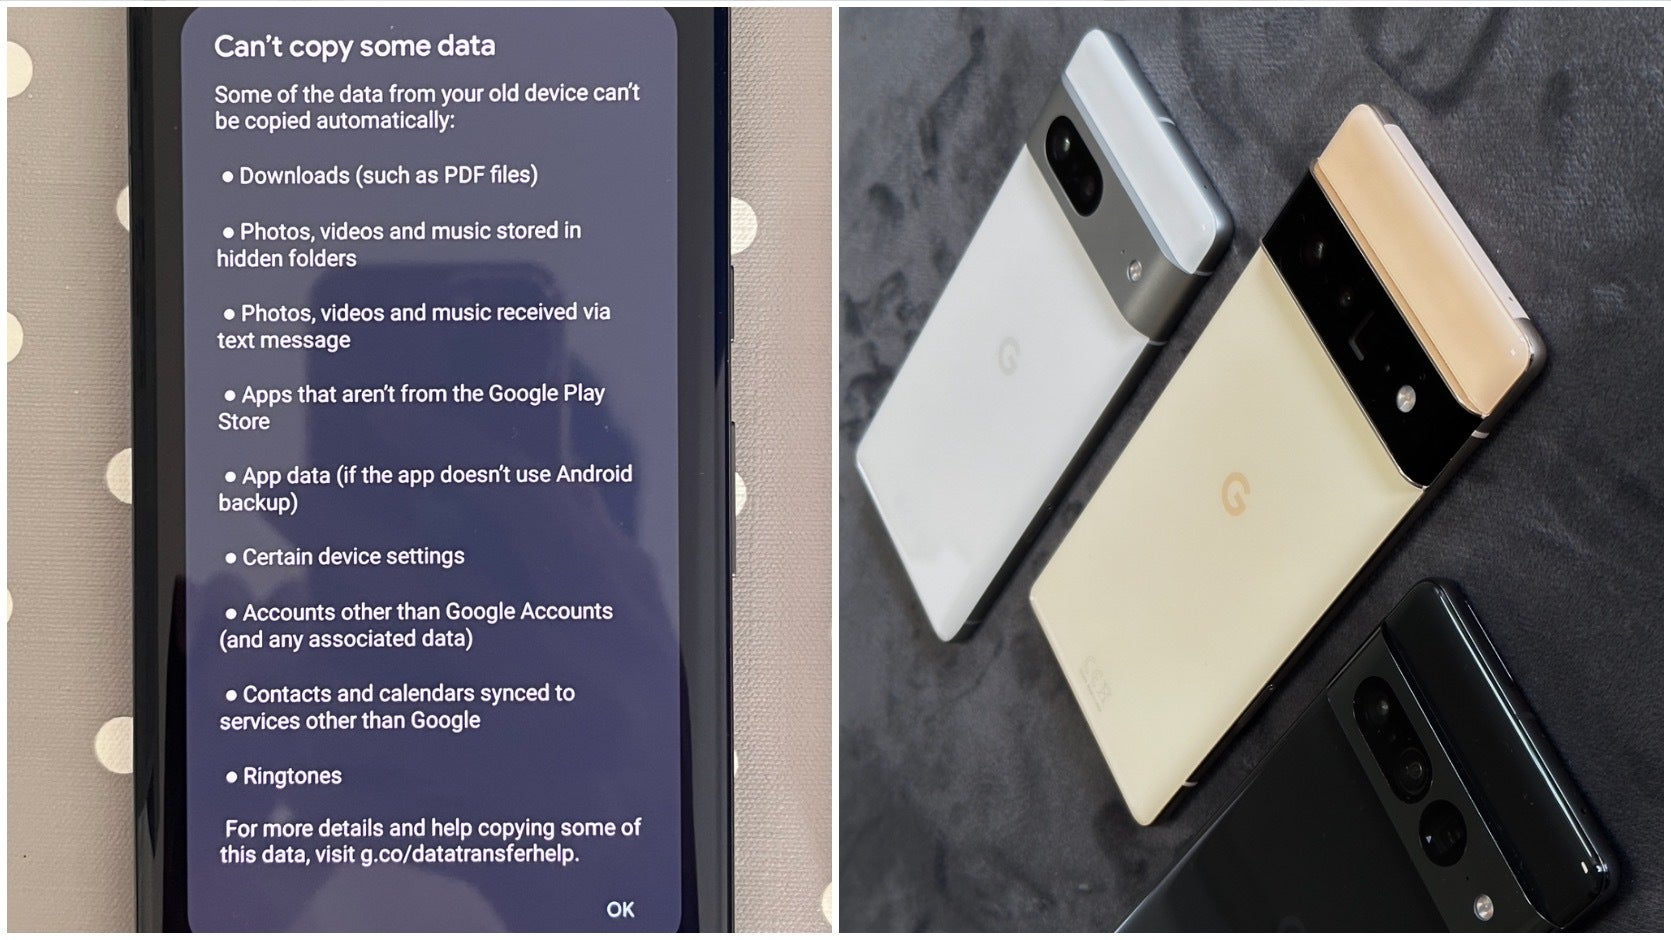 Some important data from Pixel 6 cannot be transferred to Pixel 7, let alone an iPhone or Galaxy.  - The Android iPhone?  Next prank!  Problems switching to Pixel 7 make me rethink Google's promises